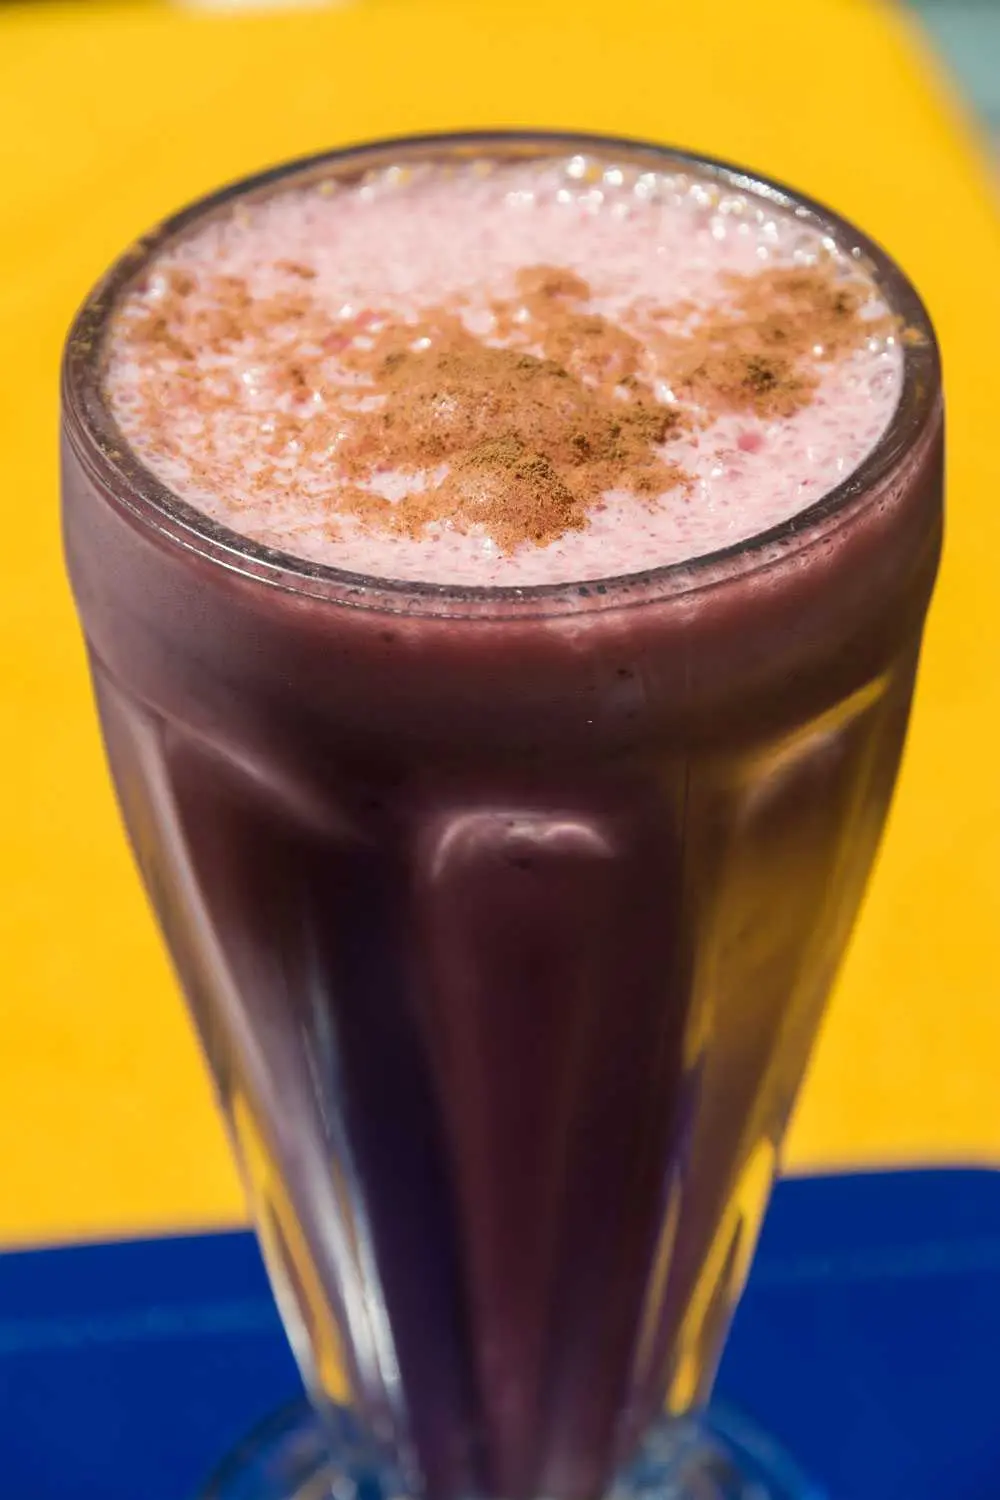 A licuado de fresa. Licuados are made from fruit and, usually, milk, though some fruits go best with water.